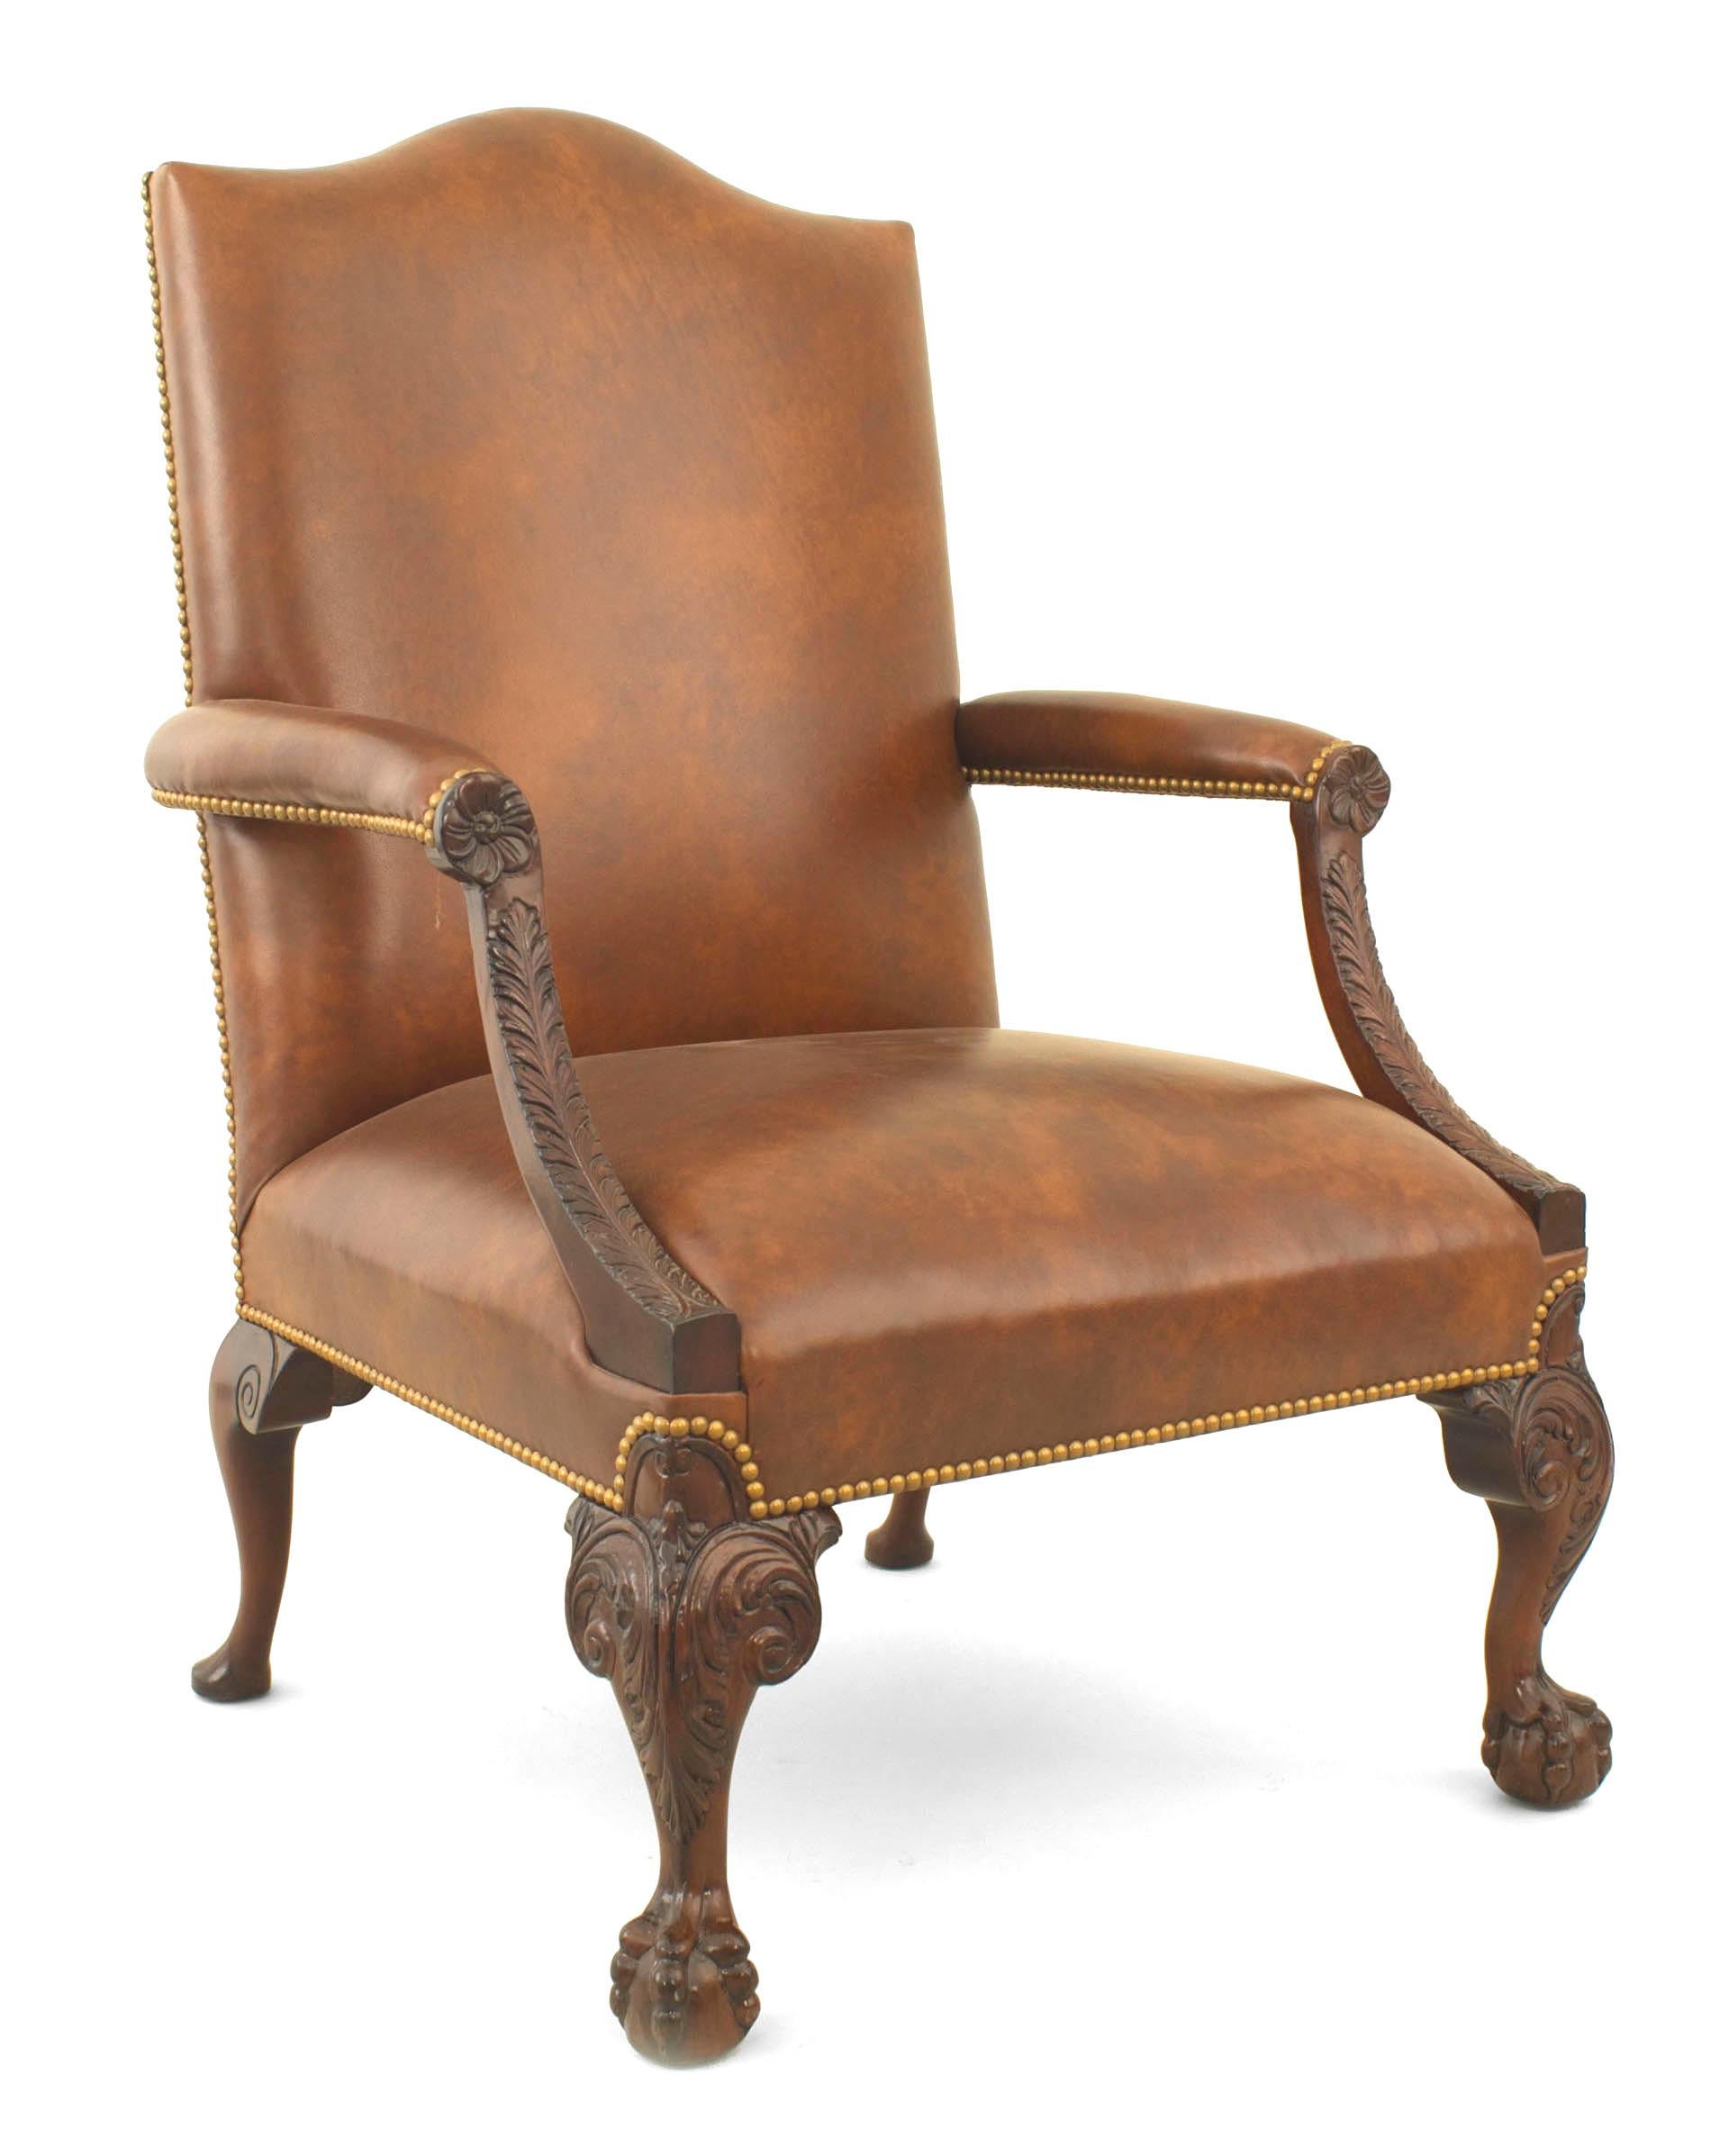 English Chippendale style (modern) mahogany carved open armchair with a shaped back and upholstered in brown leather.
 